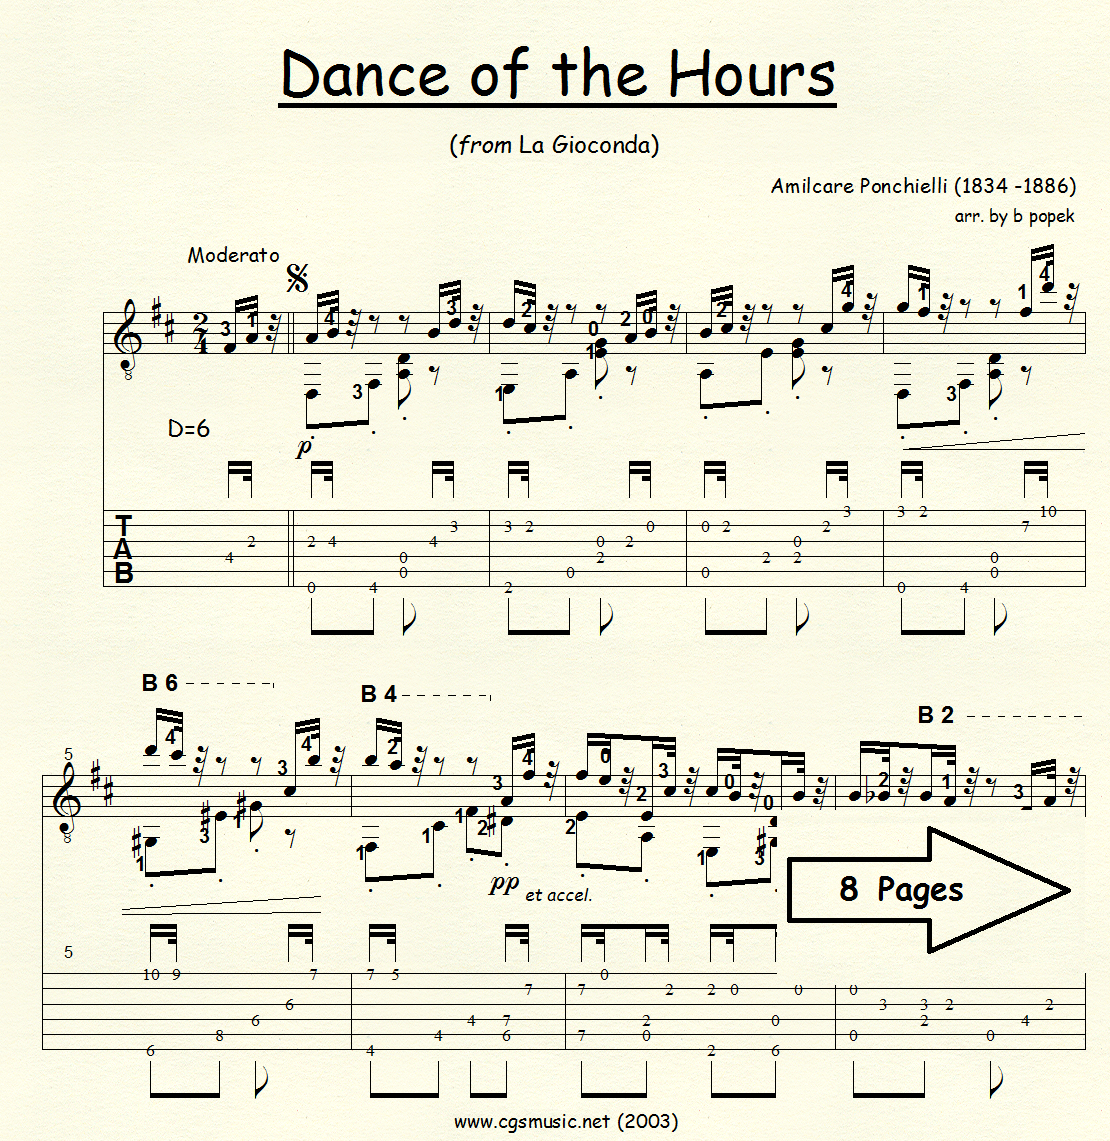 Dance of the Hours (Ponchielli) for Classical Guitar in Tablature